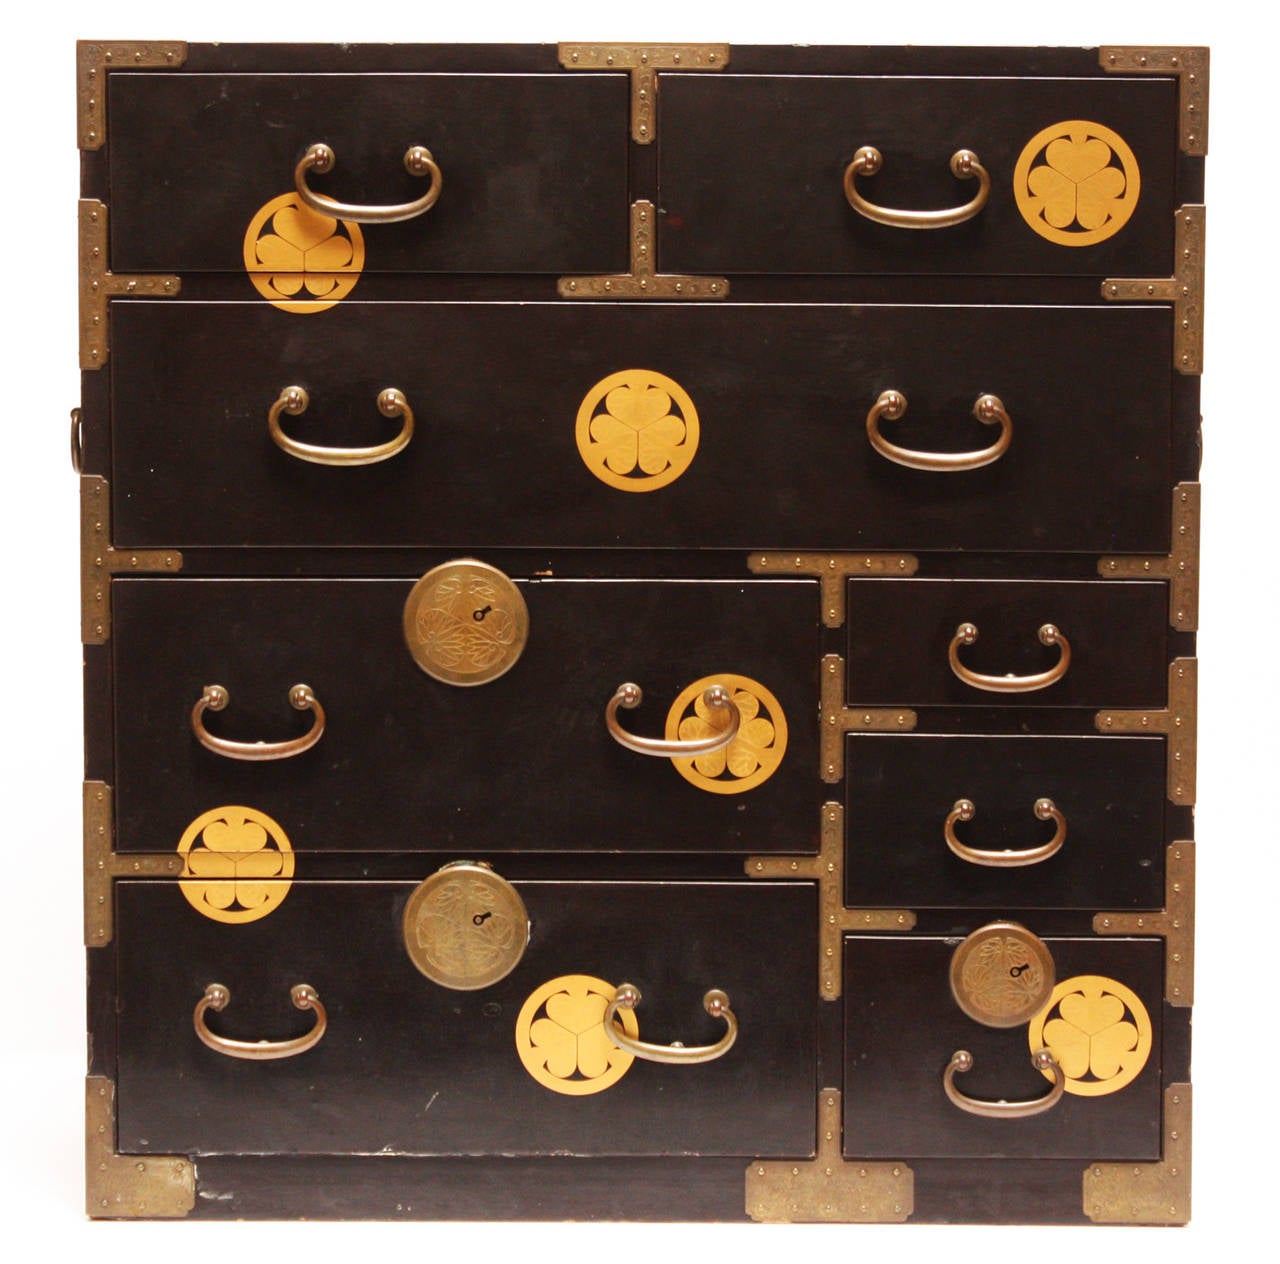 Early 19th century Japanese storage chest executed in black and gold lacquer with finely chased bronze mounts